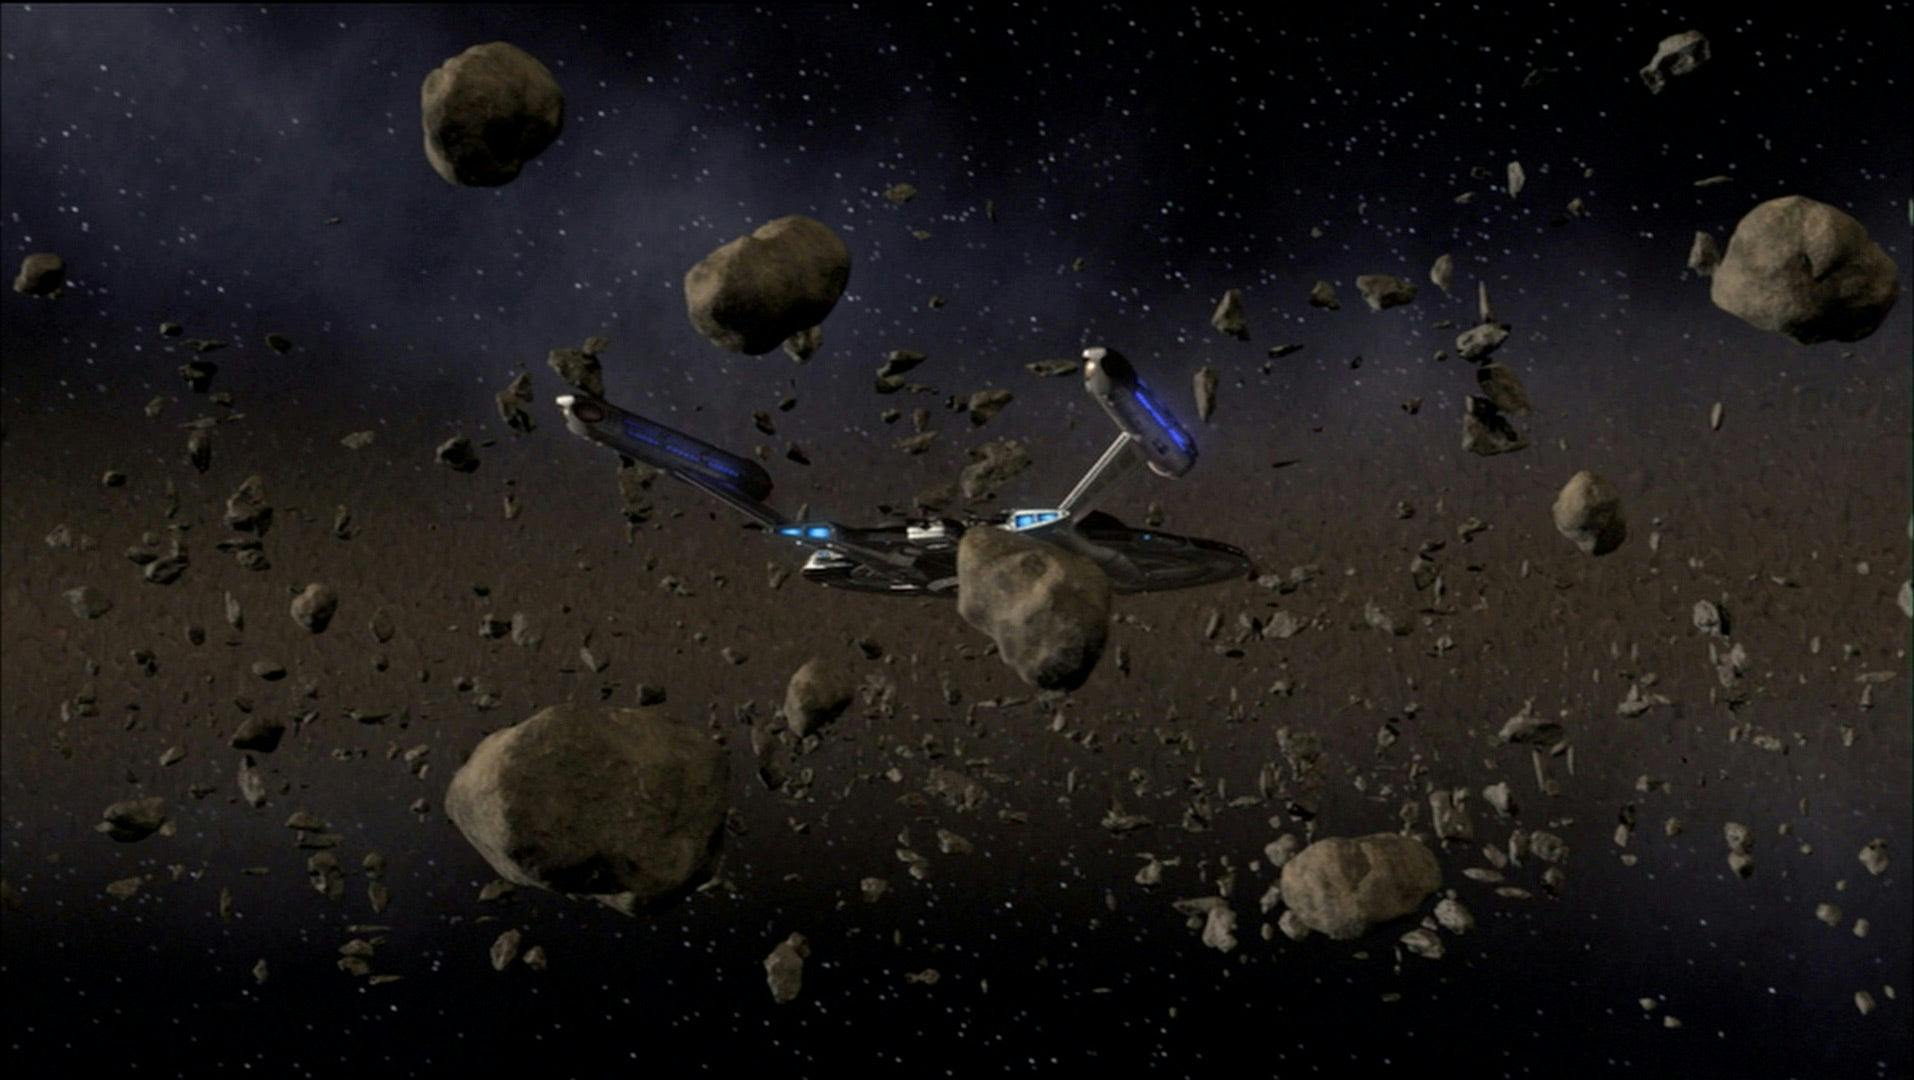 On Star Trek: Enterprise, Archer discovers that the Xindi homeworld is destroyed and is now only a field of debris